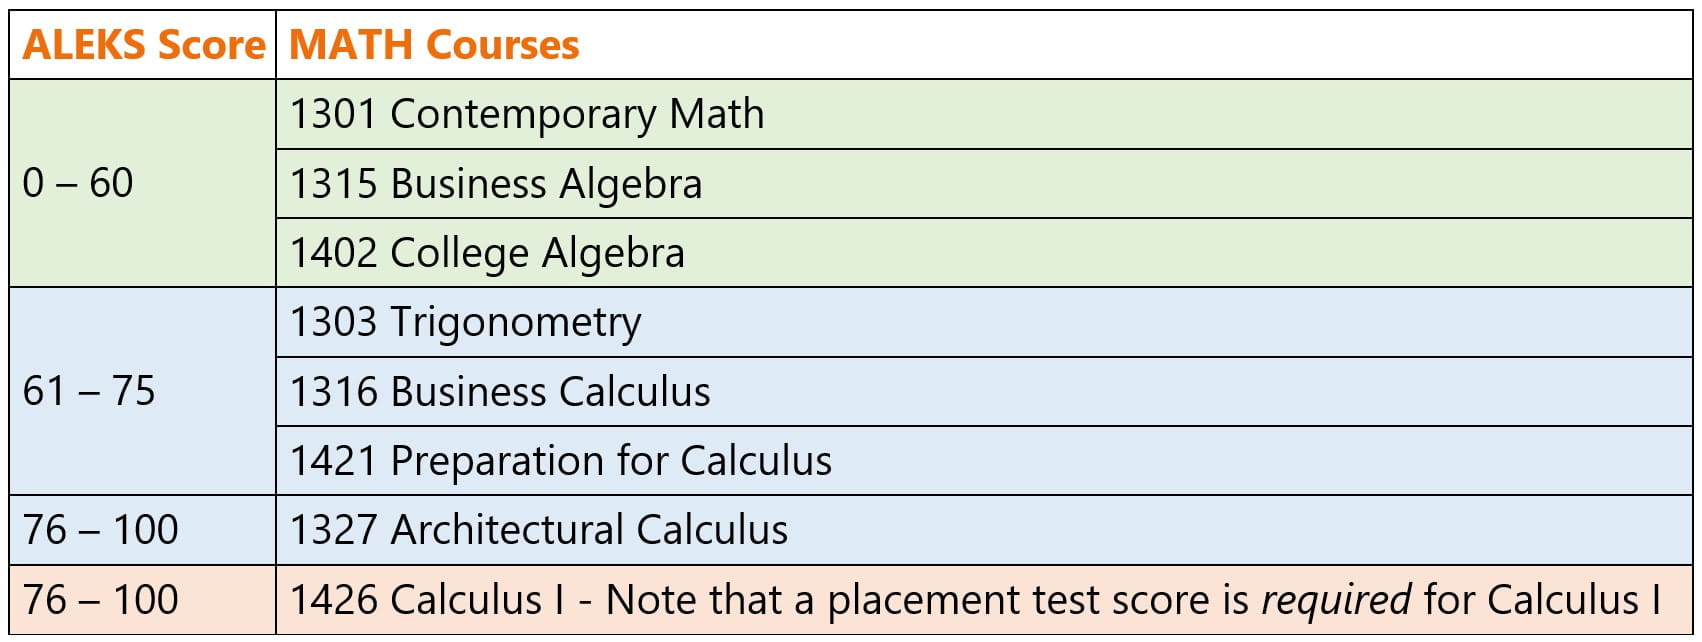 A chart showing eligible math courses for ranges of ALEKS scores. Scores 0 to 60 can register for Math 1301 Contemporary Math, 1315 Business Algebra, or 1402 College Algebra. 61 to 75 can register for Math 1303 Trigonometry, 1316 Business Calculus, or 1421 Preparation for Calculus. 76 and up can register for Math 1327 Architectural Calculus or 1426 Calculus 1.